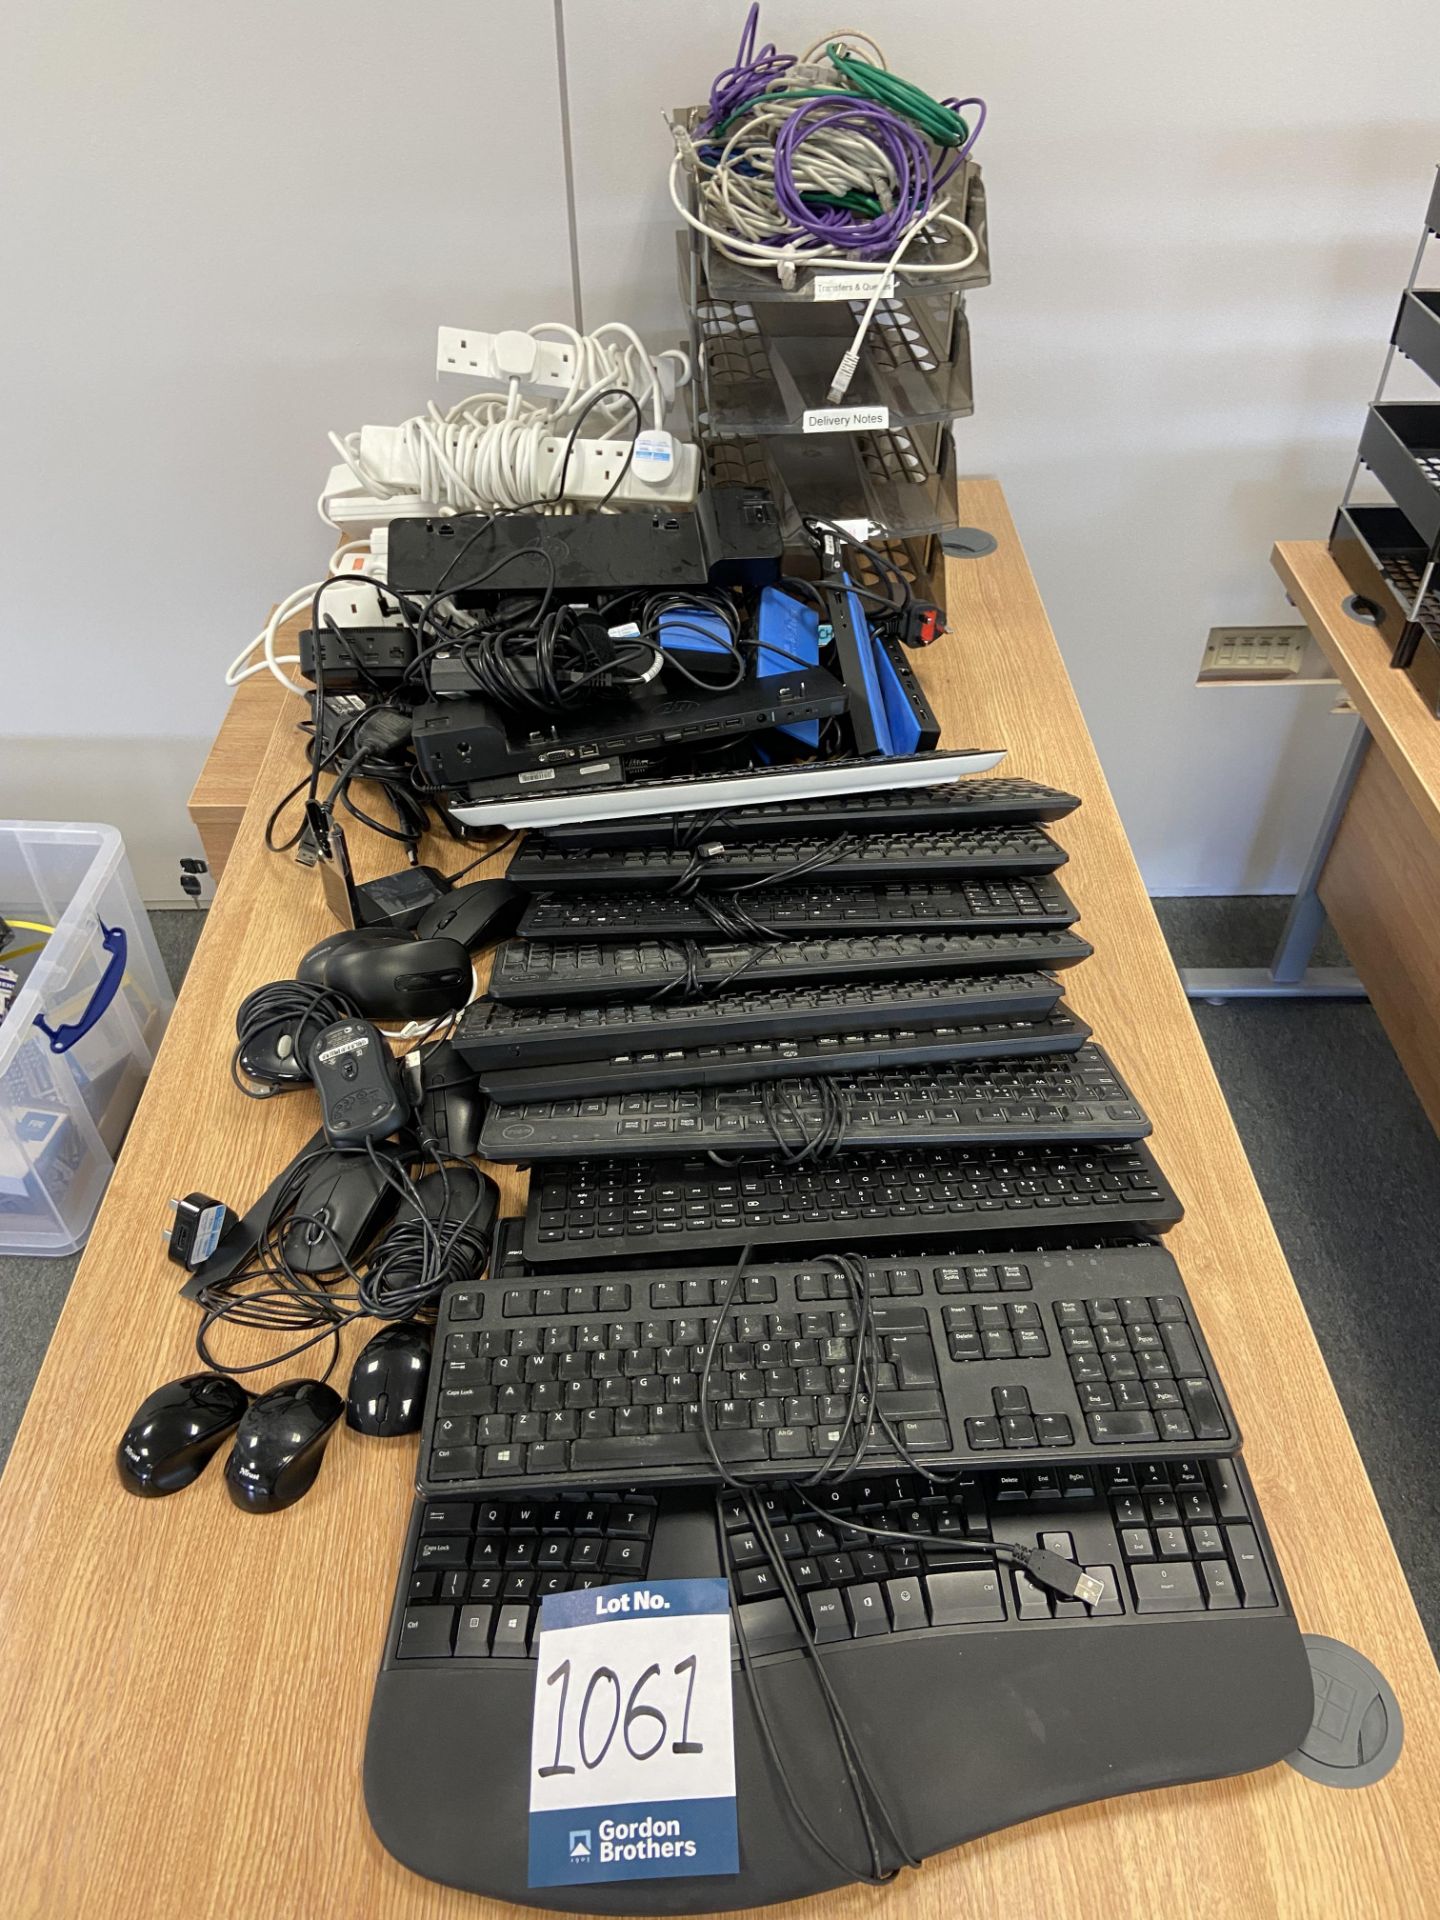 Lot comprisng: Various laptop chargers, phone chargers, docking stations, keyboards, mouses,